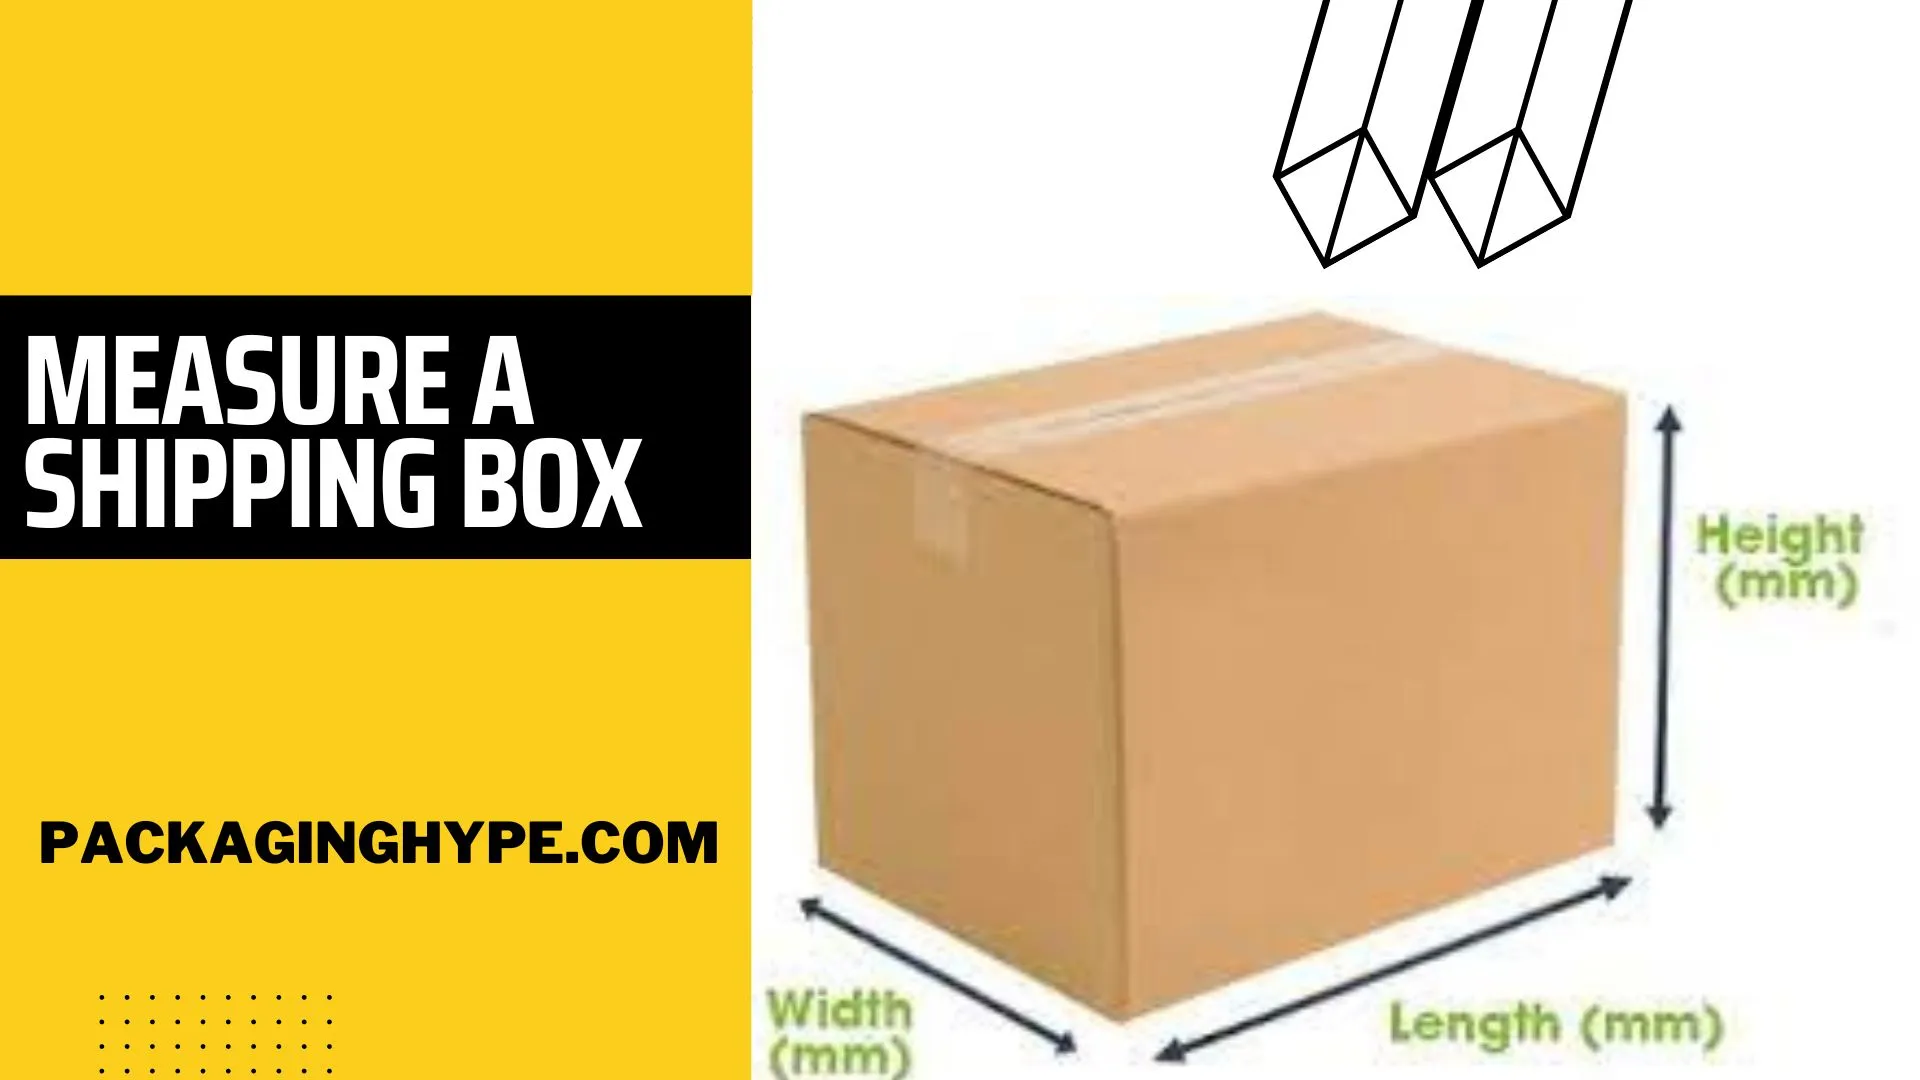 How To Measure A Box Shipping?